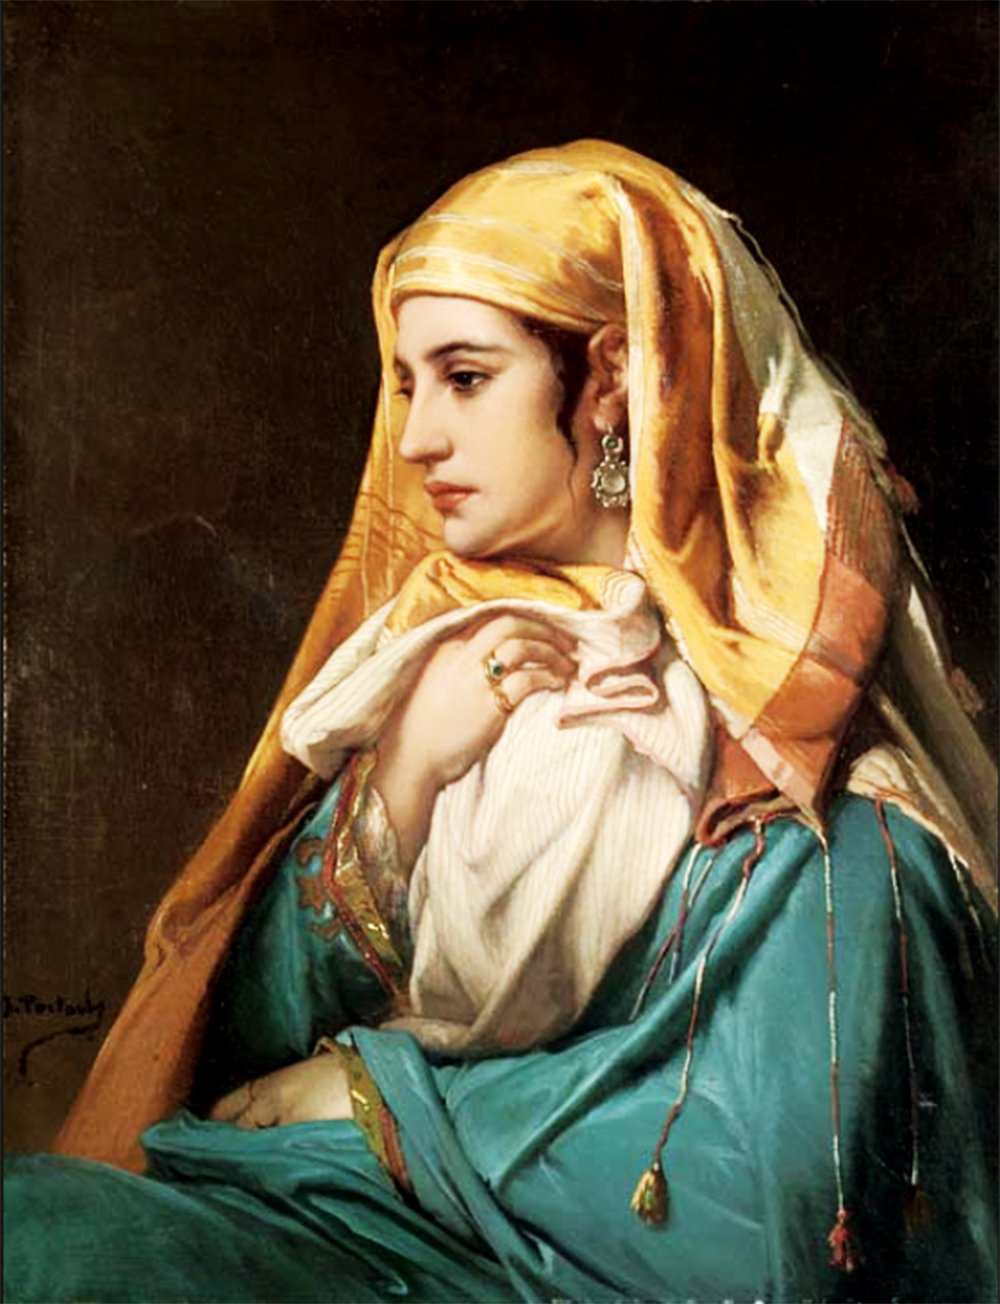 A portrait of a woman in a blue robe and a yellow headscarf, wearing rings and earrings.